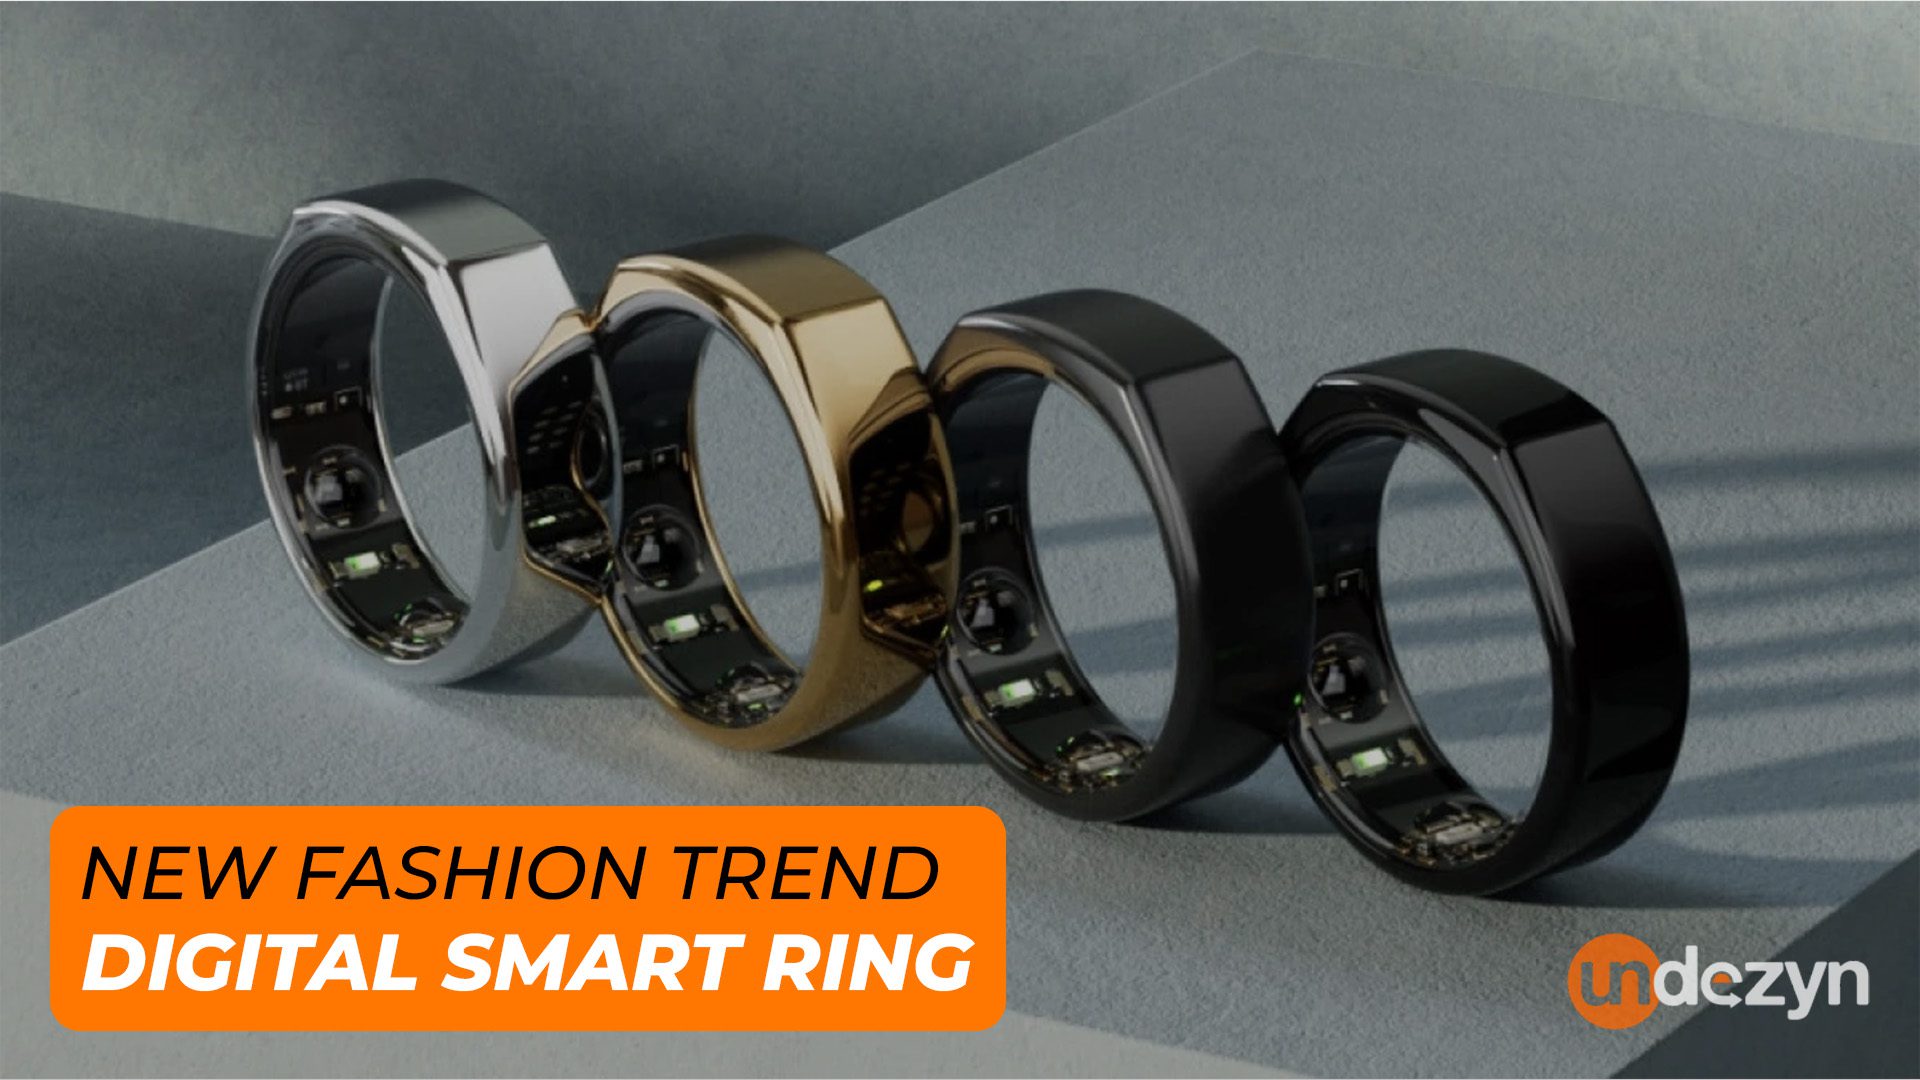 Are smart rings the future of wearable tech? » Gadget Flow